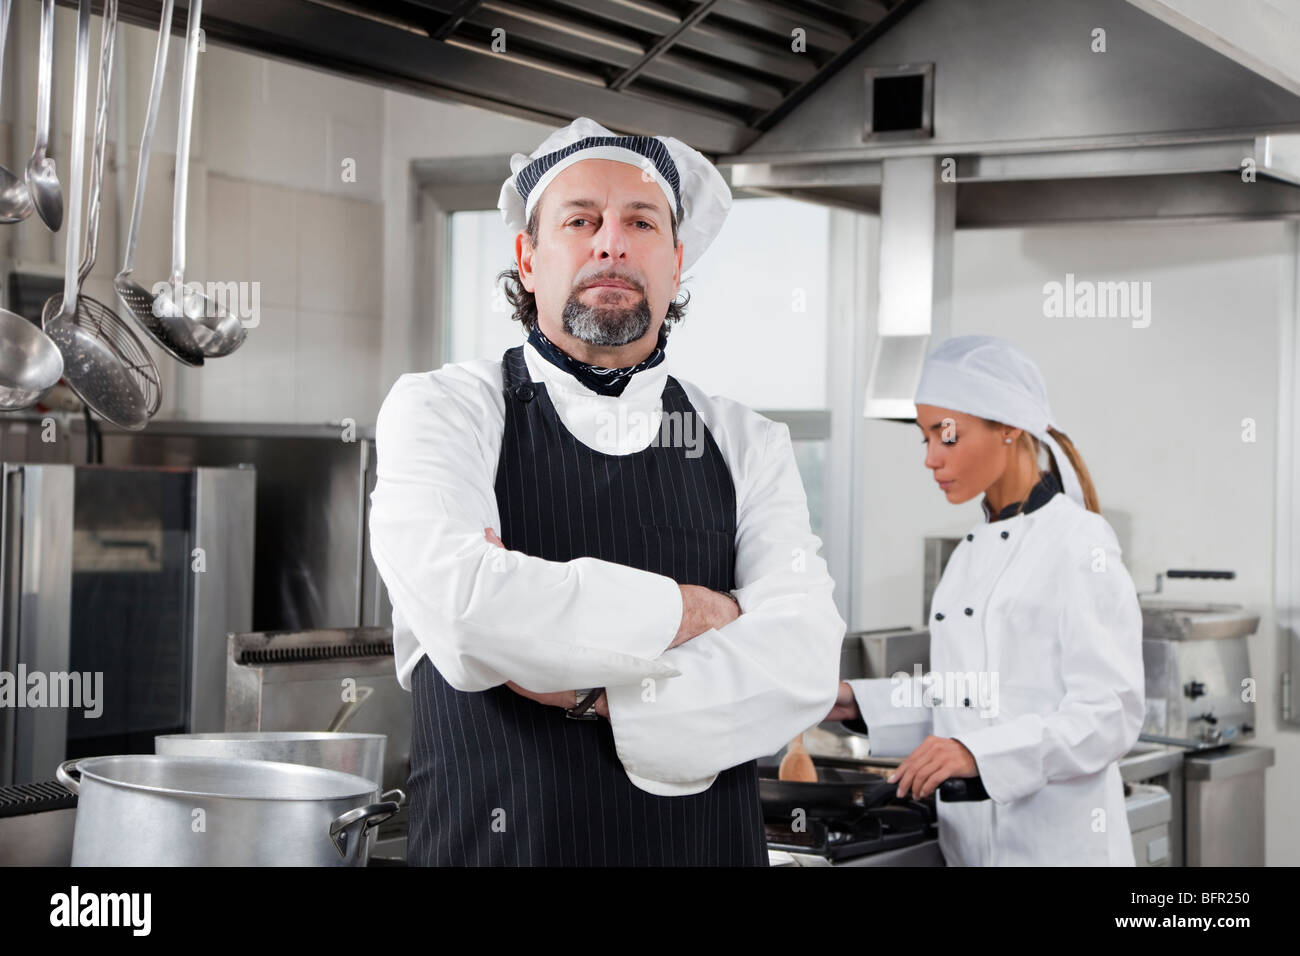 Portrait of smiling chef looking at camera in kitchen Banque D'Images